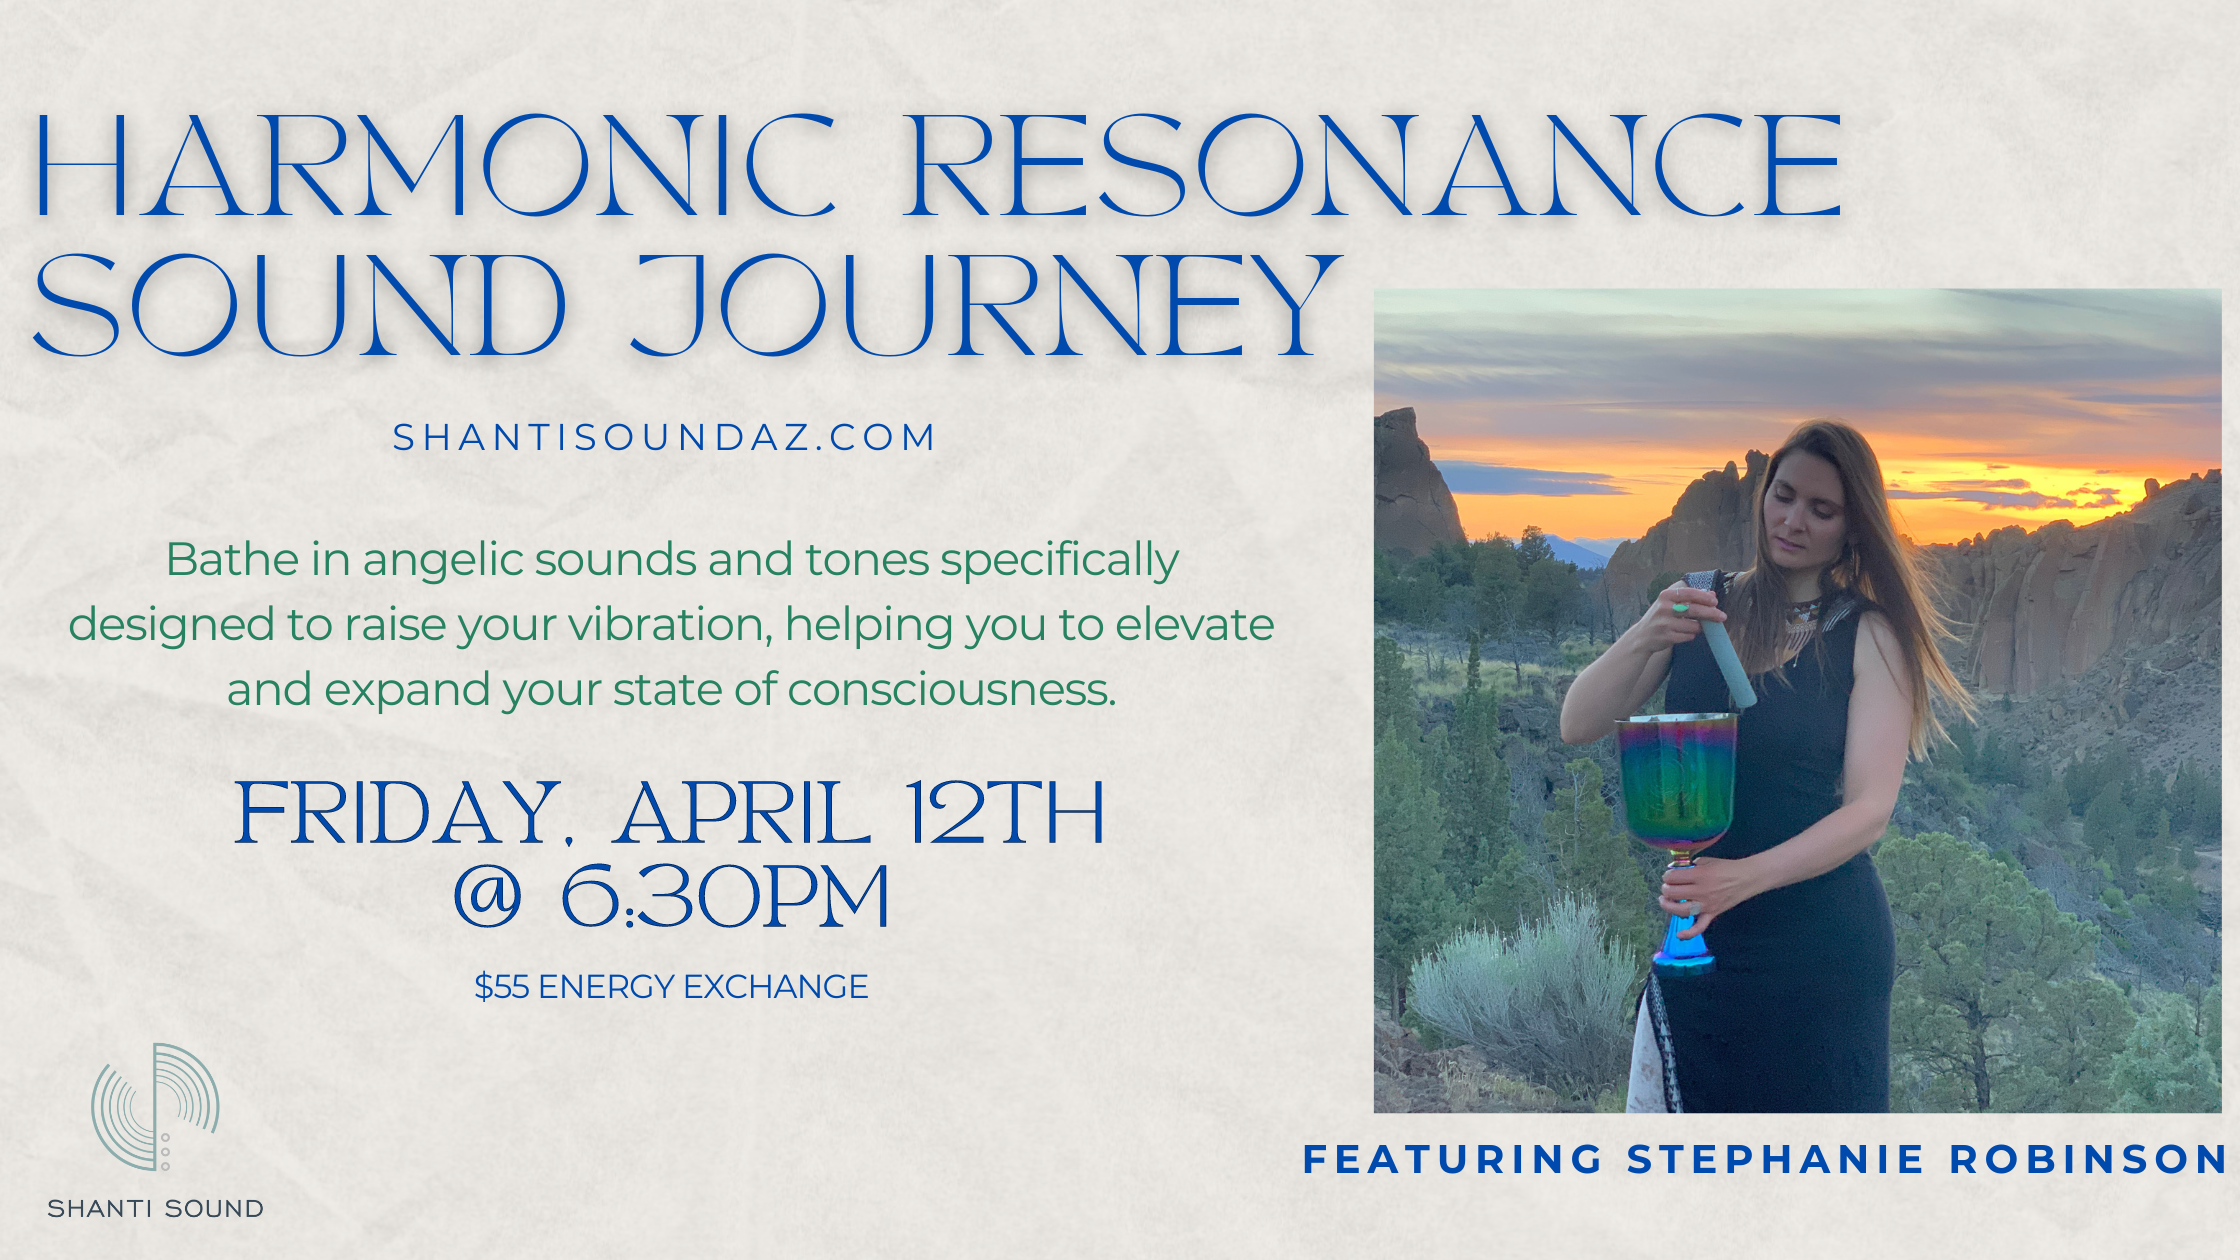 Featured image for “Harmonic Resonance Sound Journey with Stephanie Robinson”